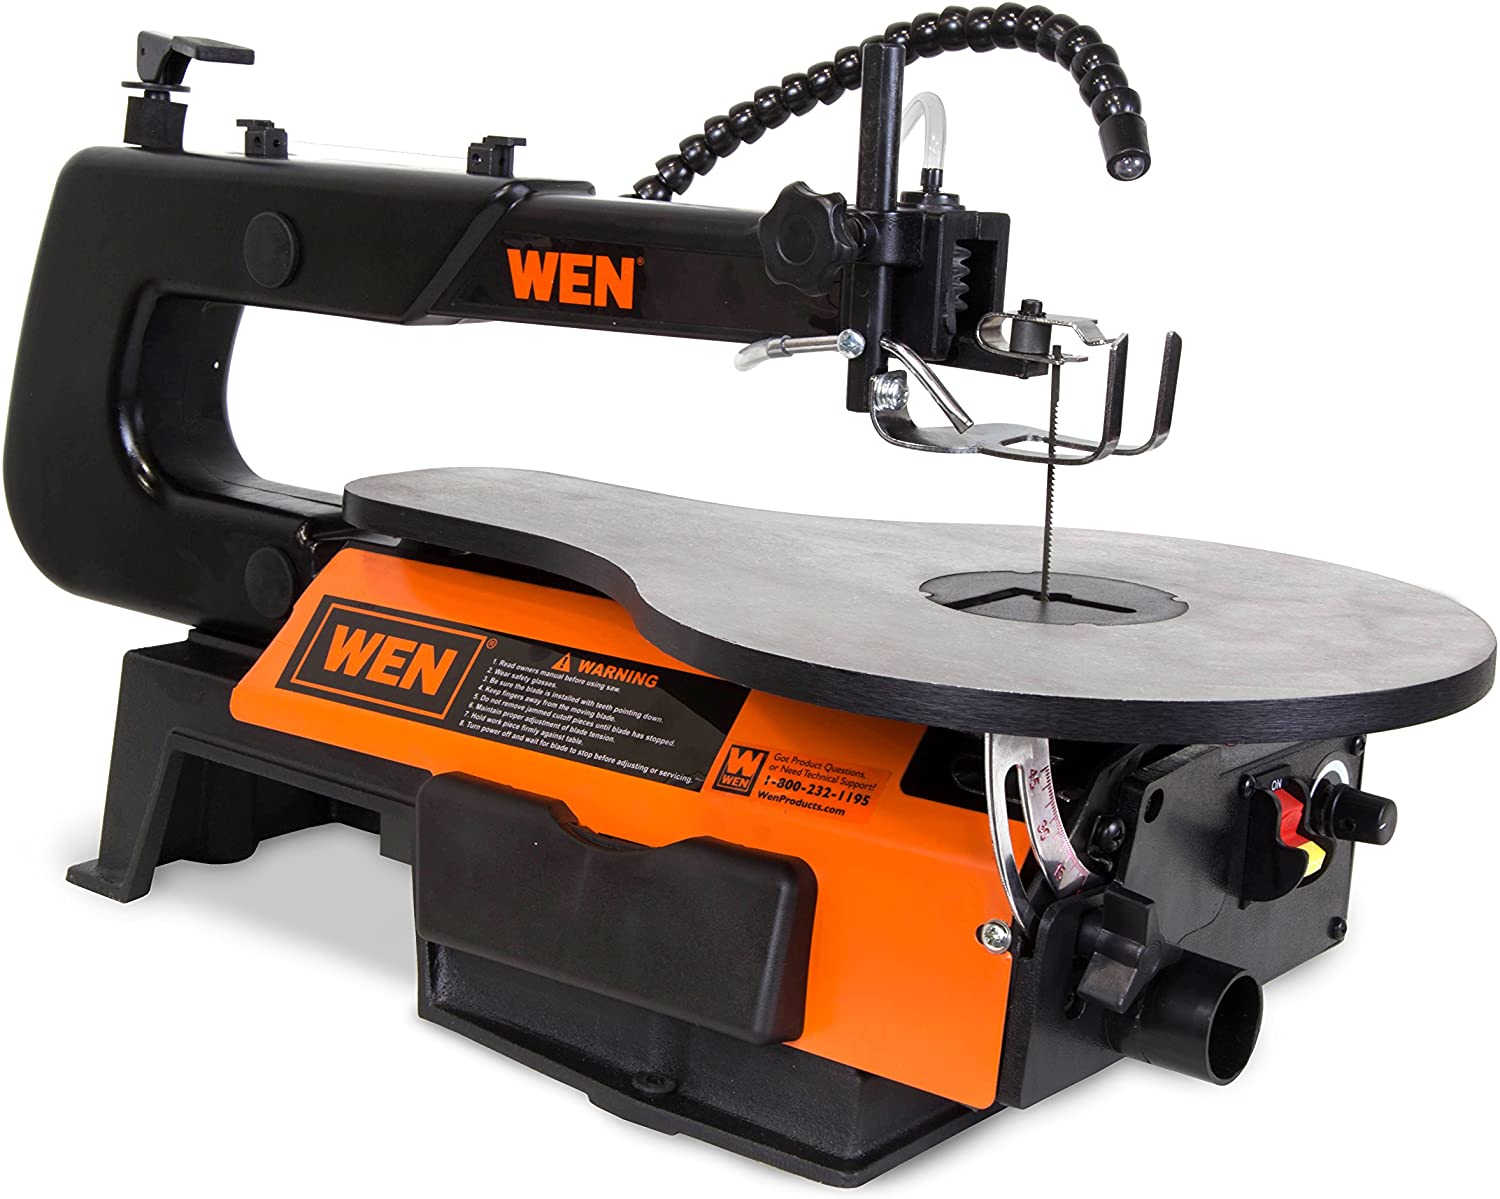 10 Best Scroll Saw Reviews 2020